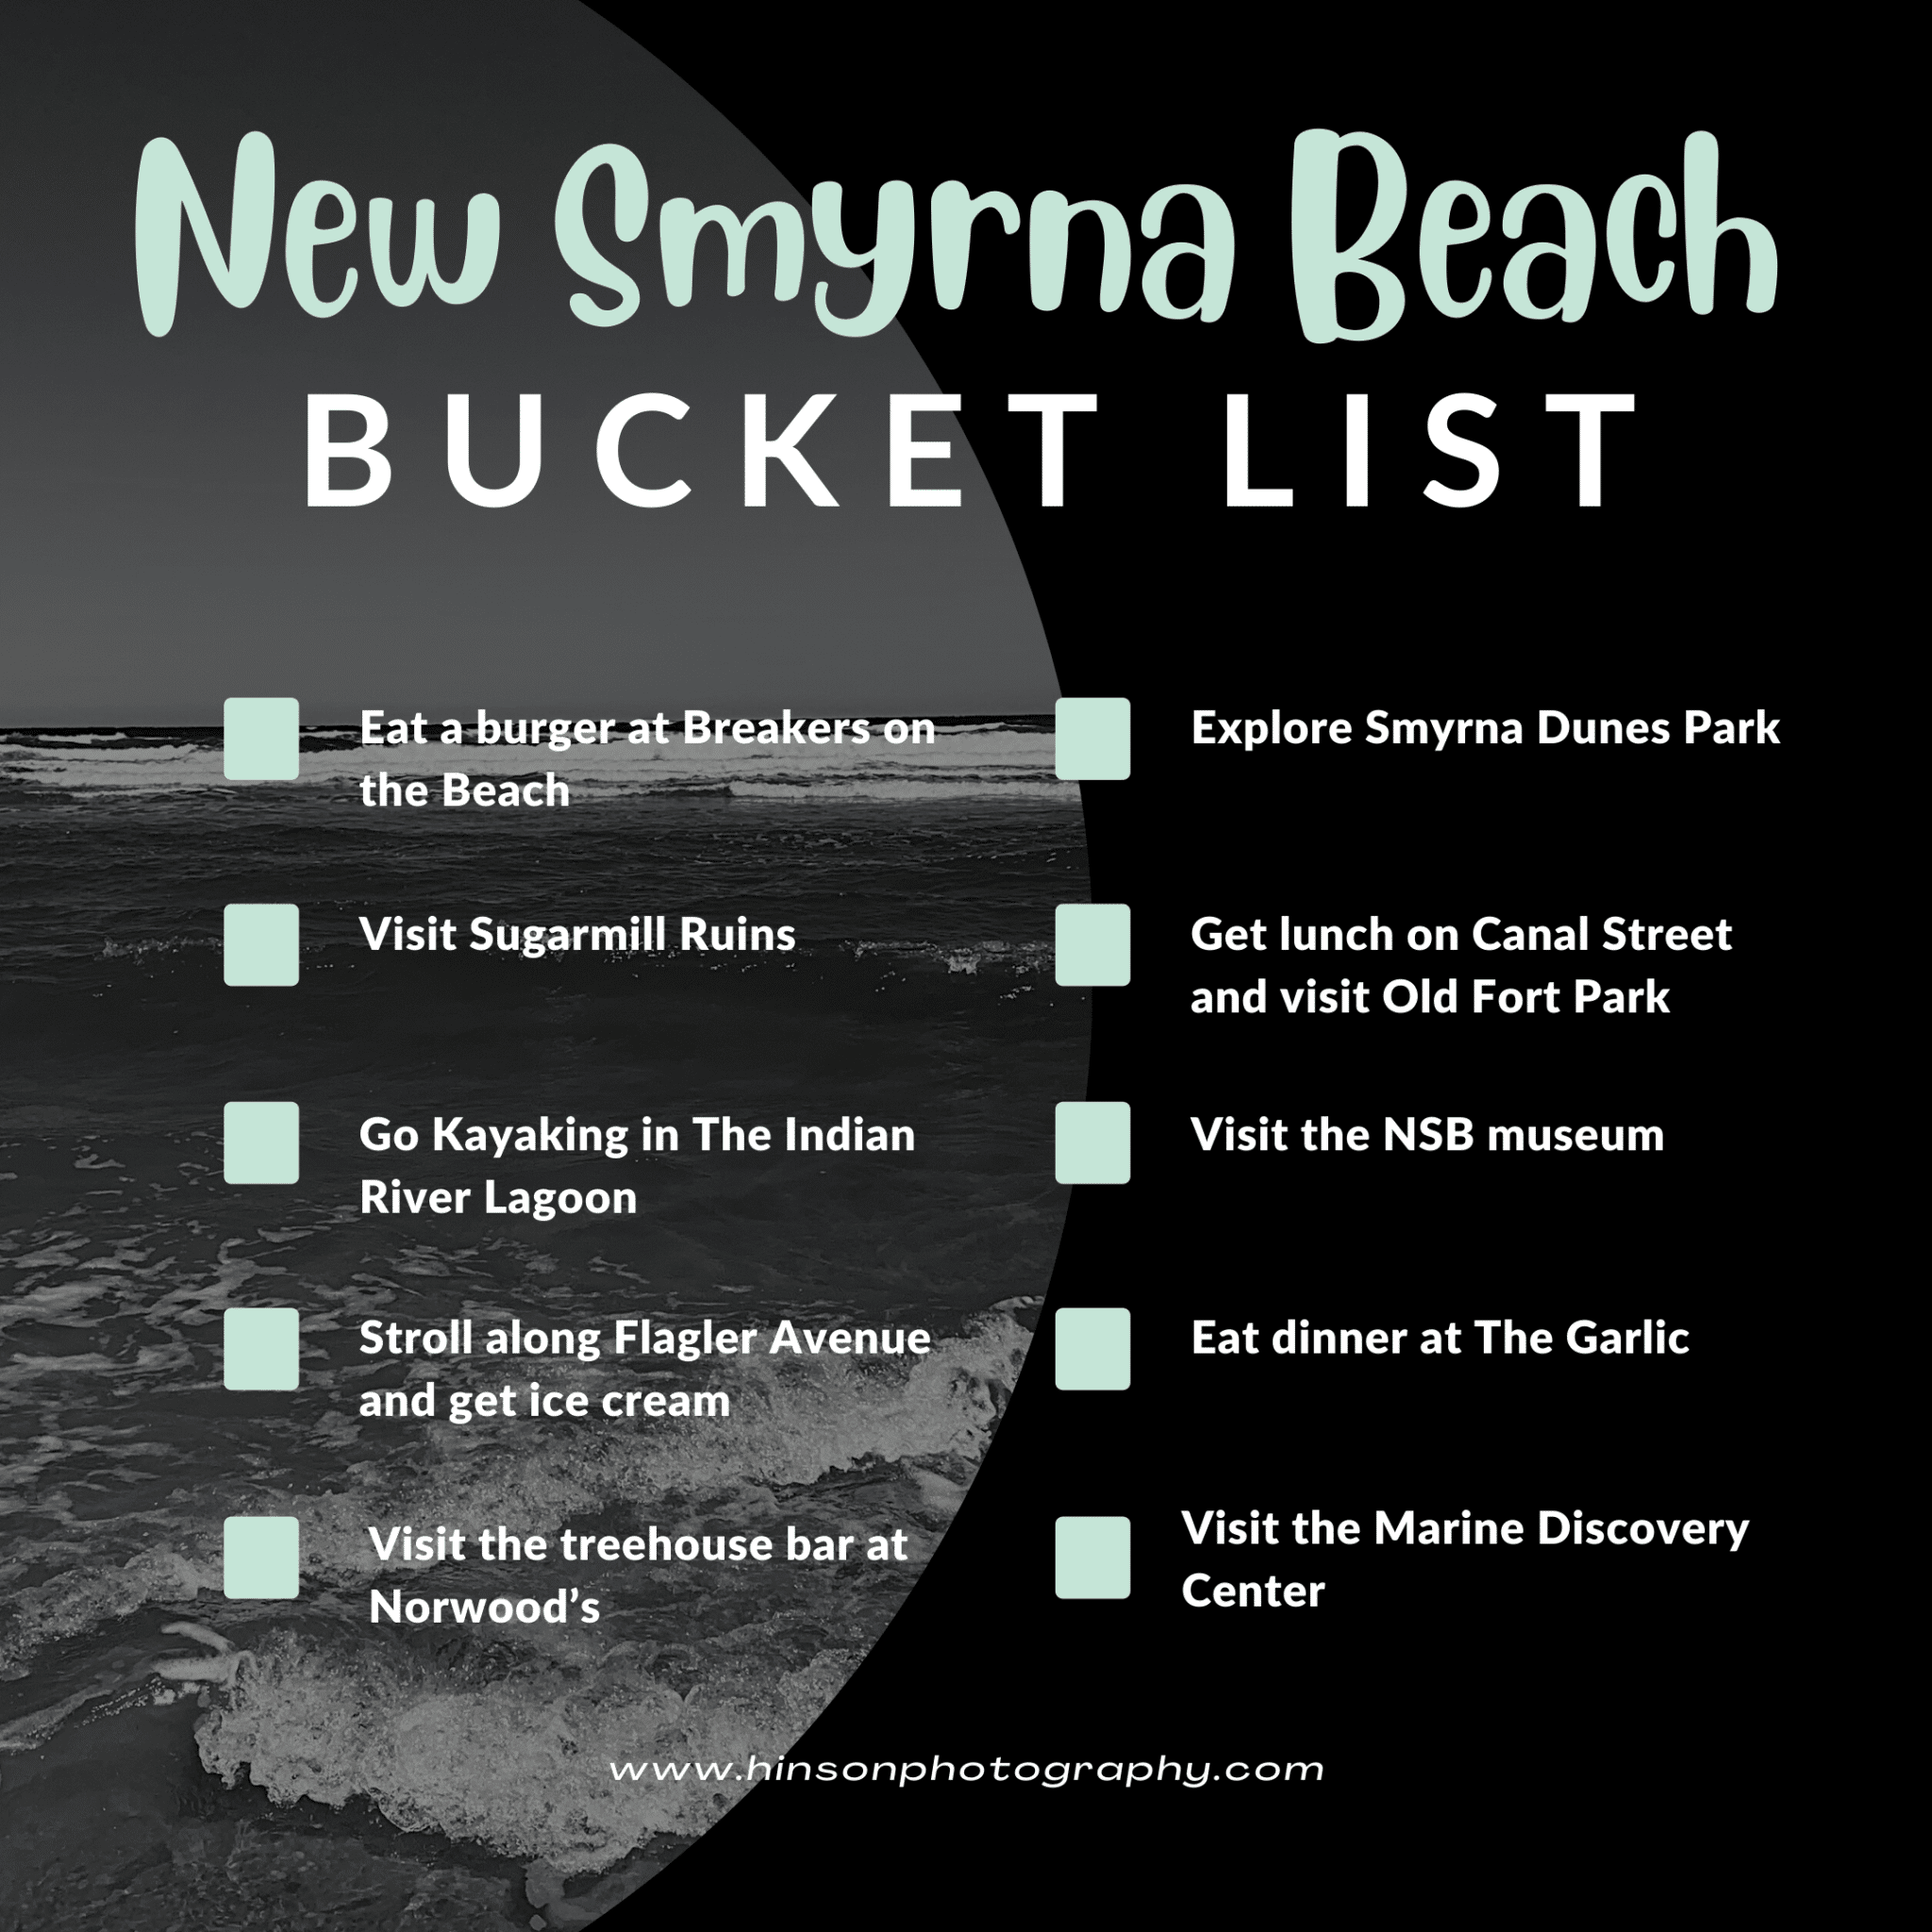 Things to do in New Smyrna Beach graphic featuring a bucket list of things to do with a black and white image of the waves in New Smyrna Beach